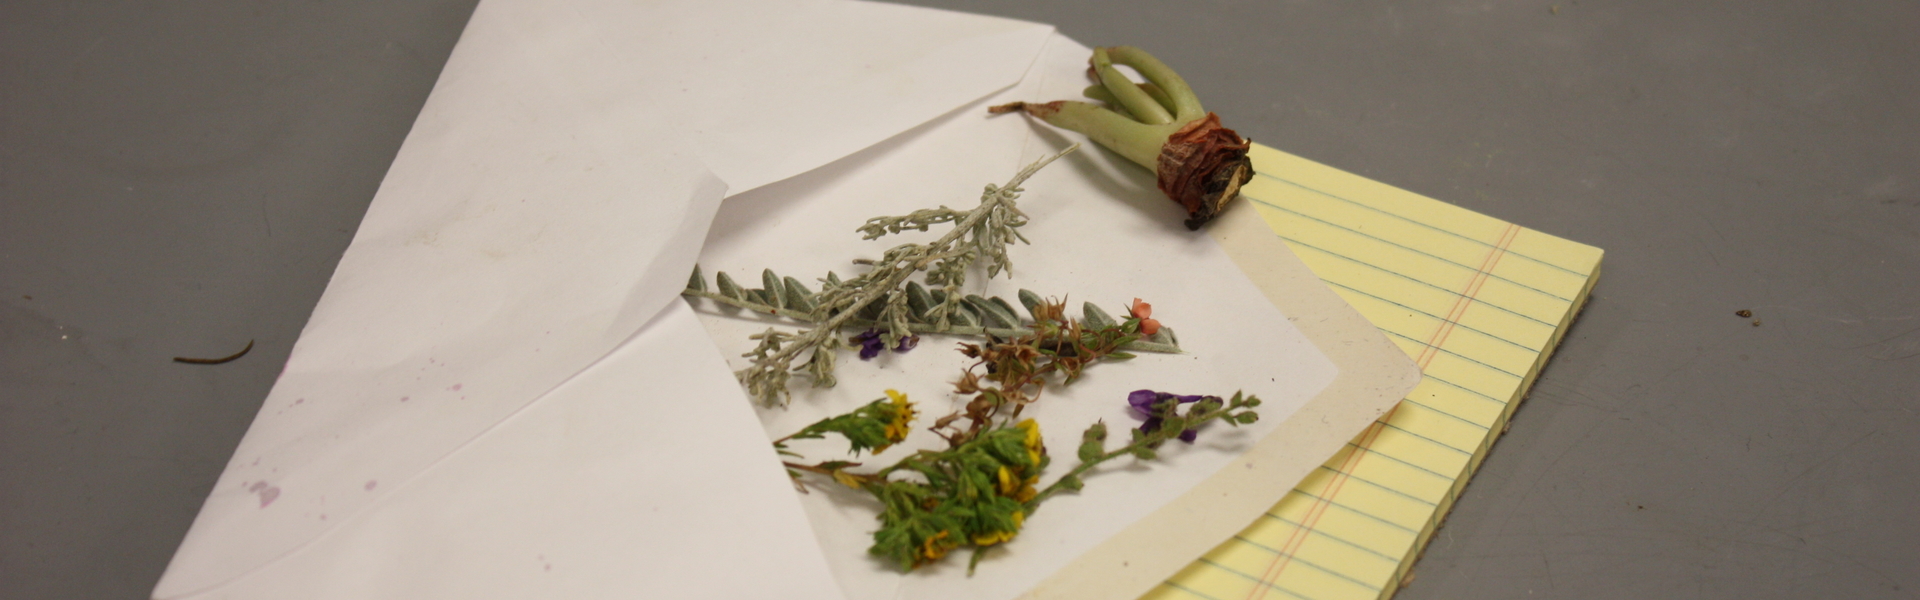 Image of Plant Samples